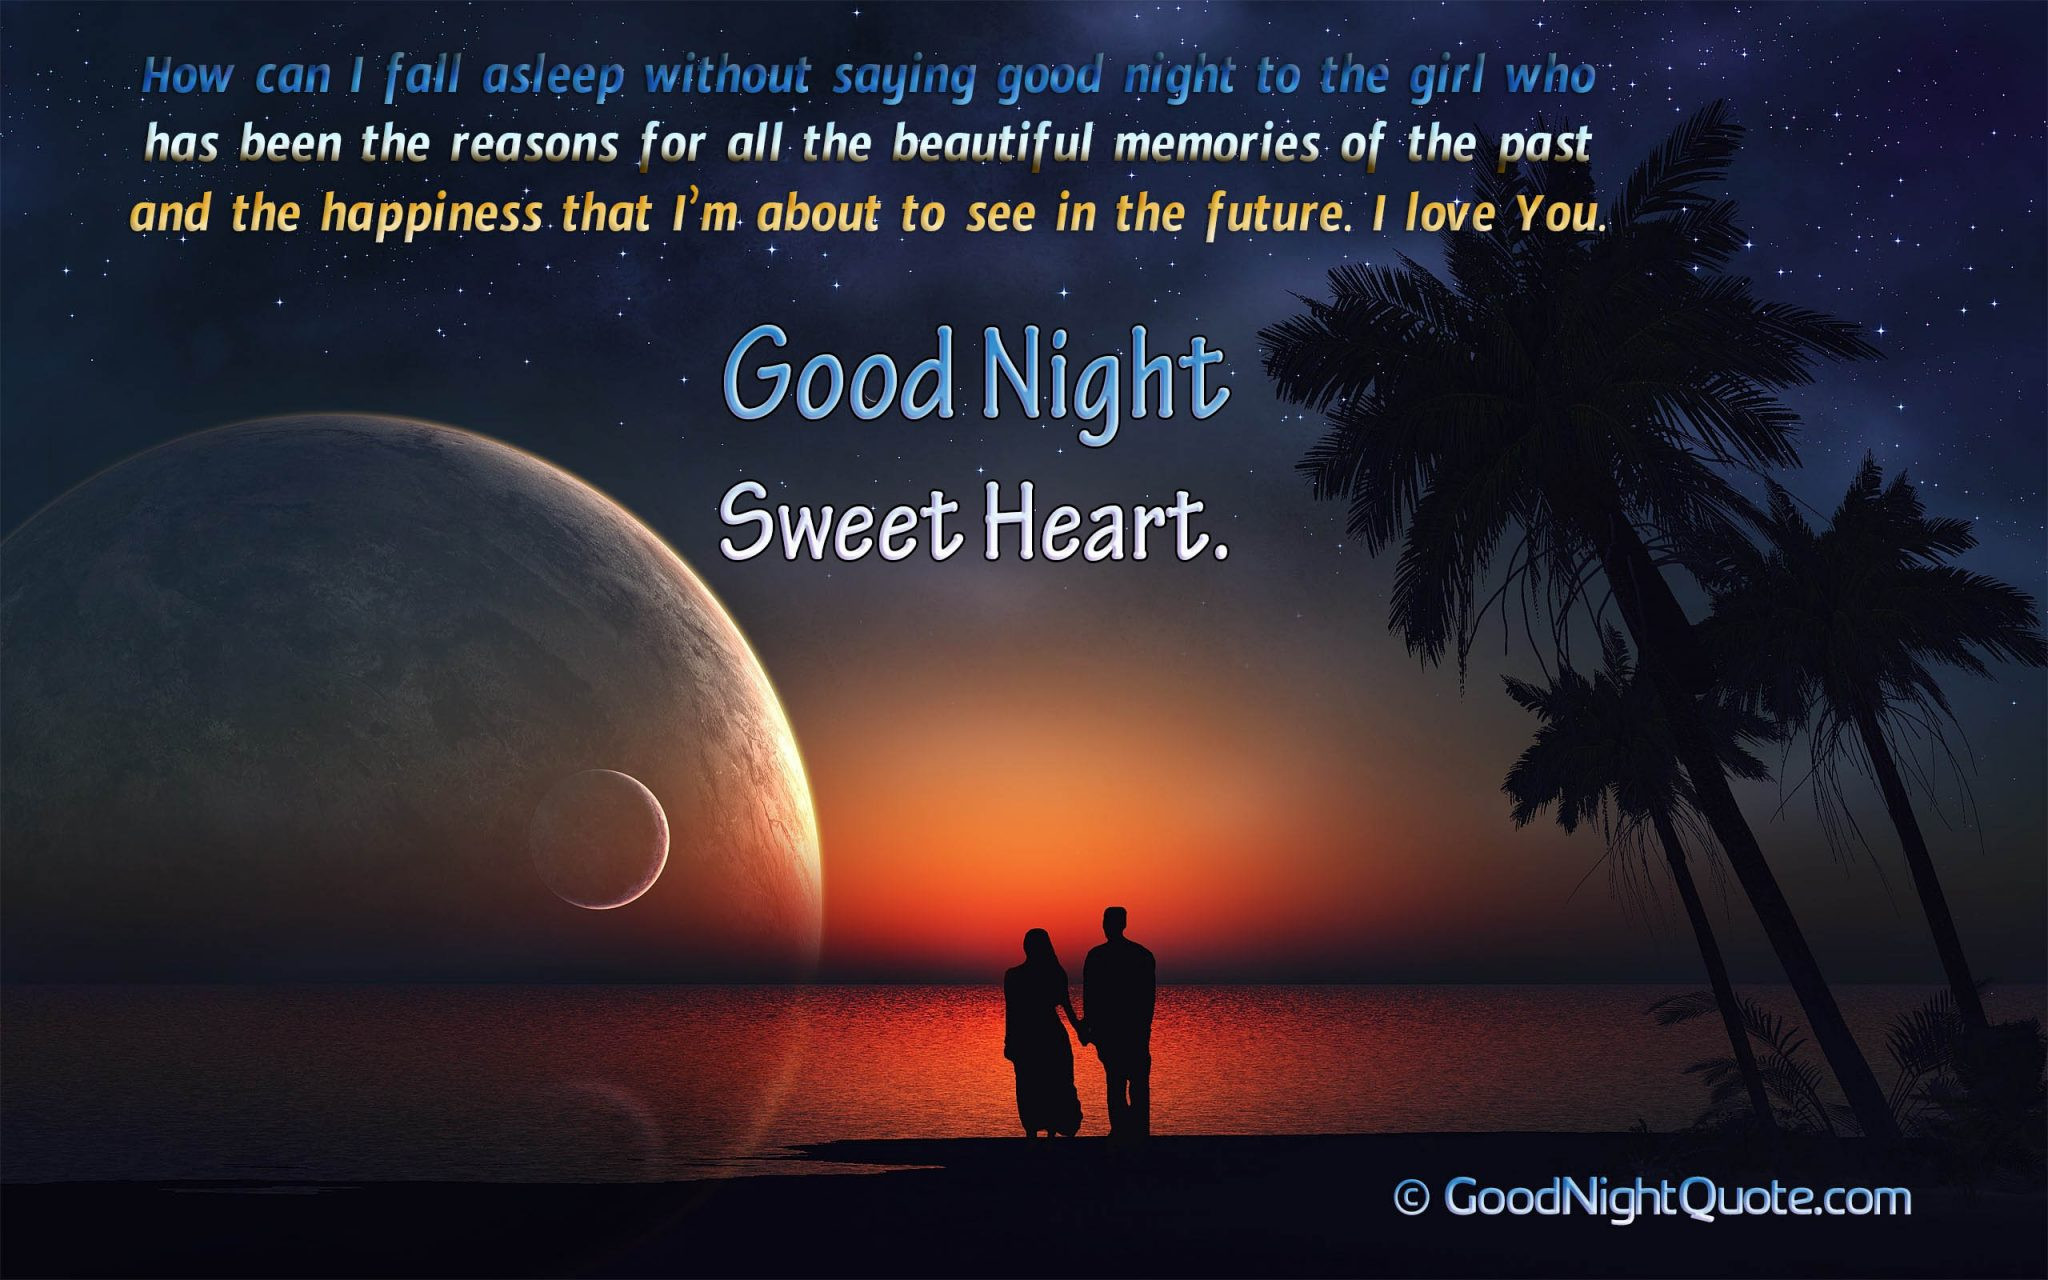 Goodnight Romantic Quotes
 50 Cute & Romantic Good Night Messages for Her Good